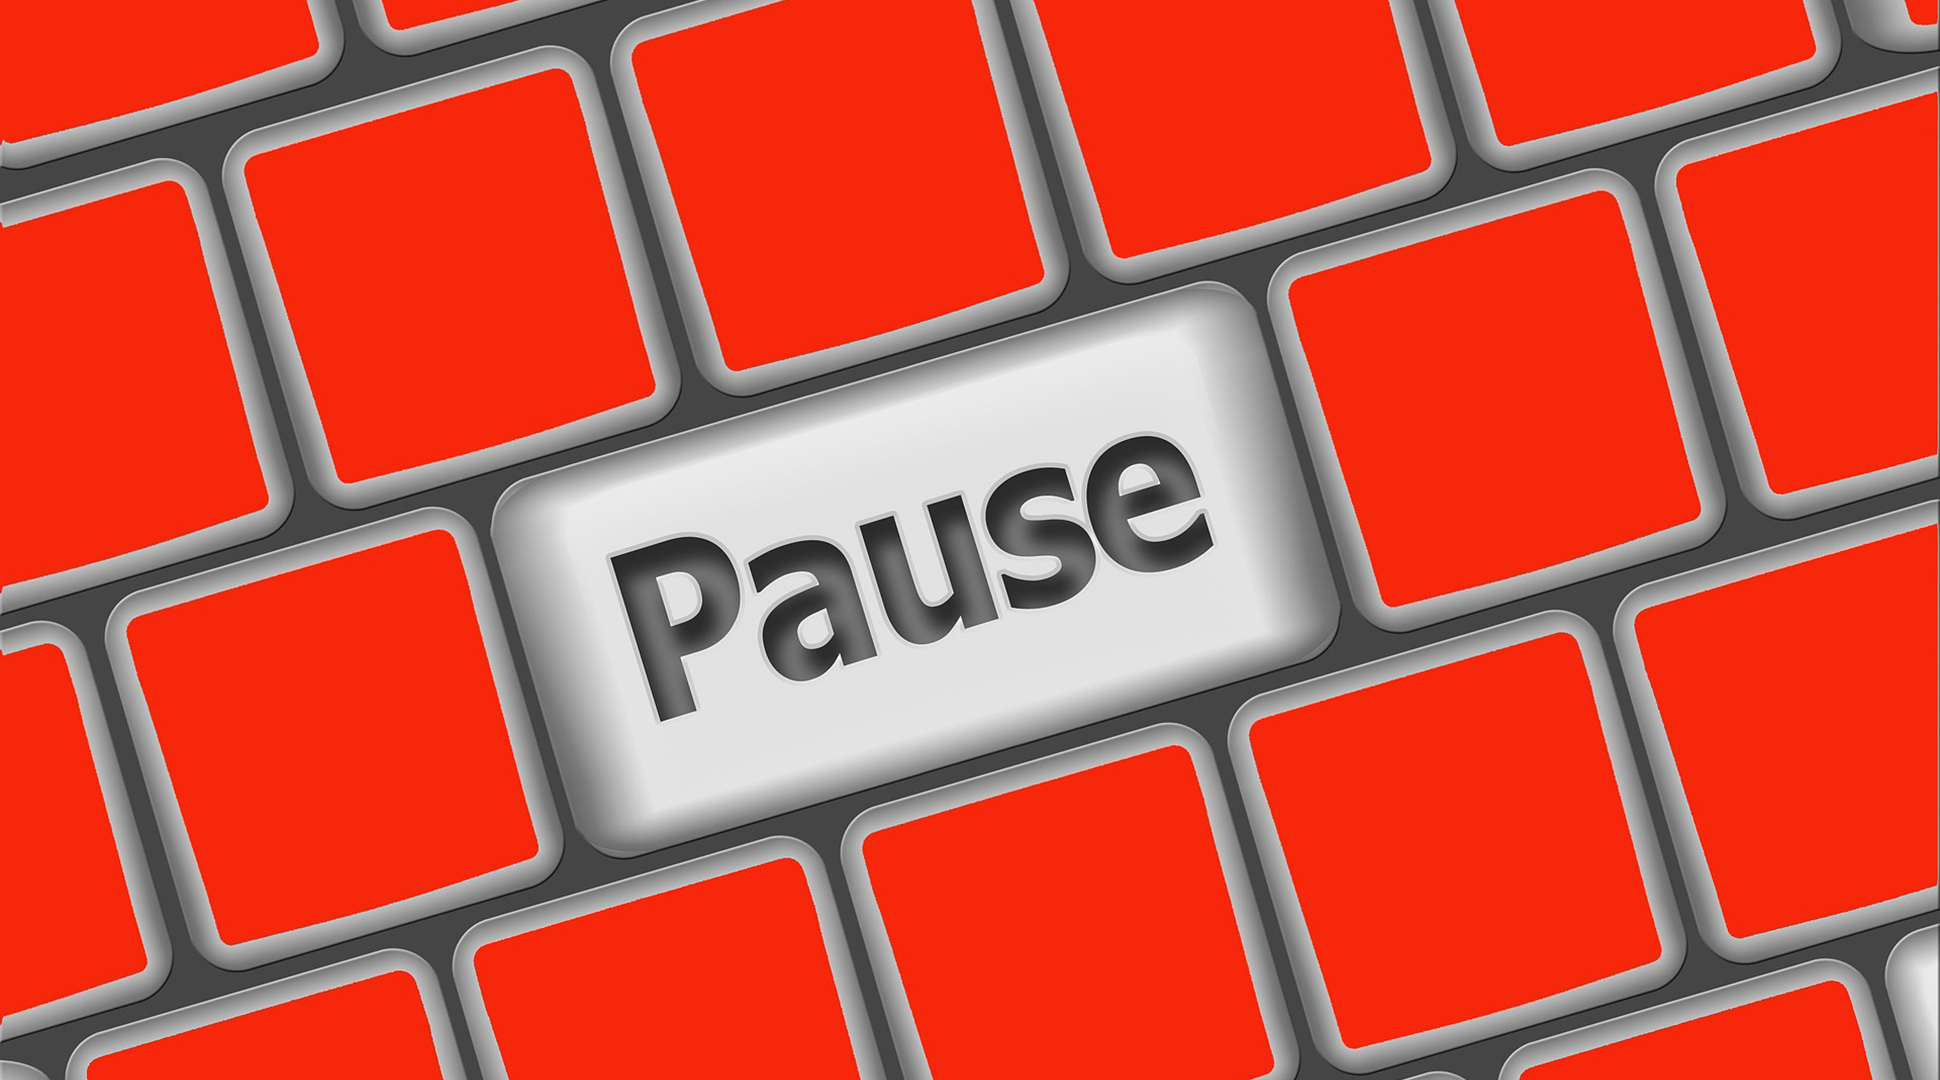 Hitting life's pause button